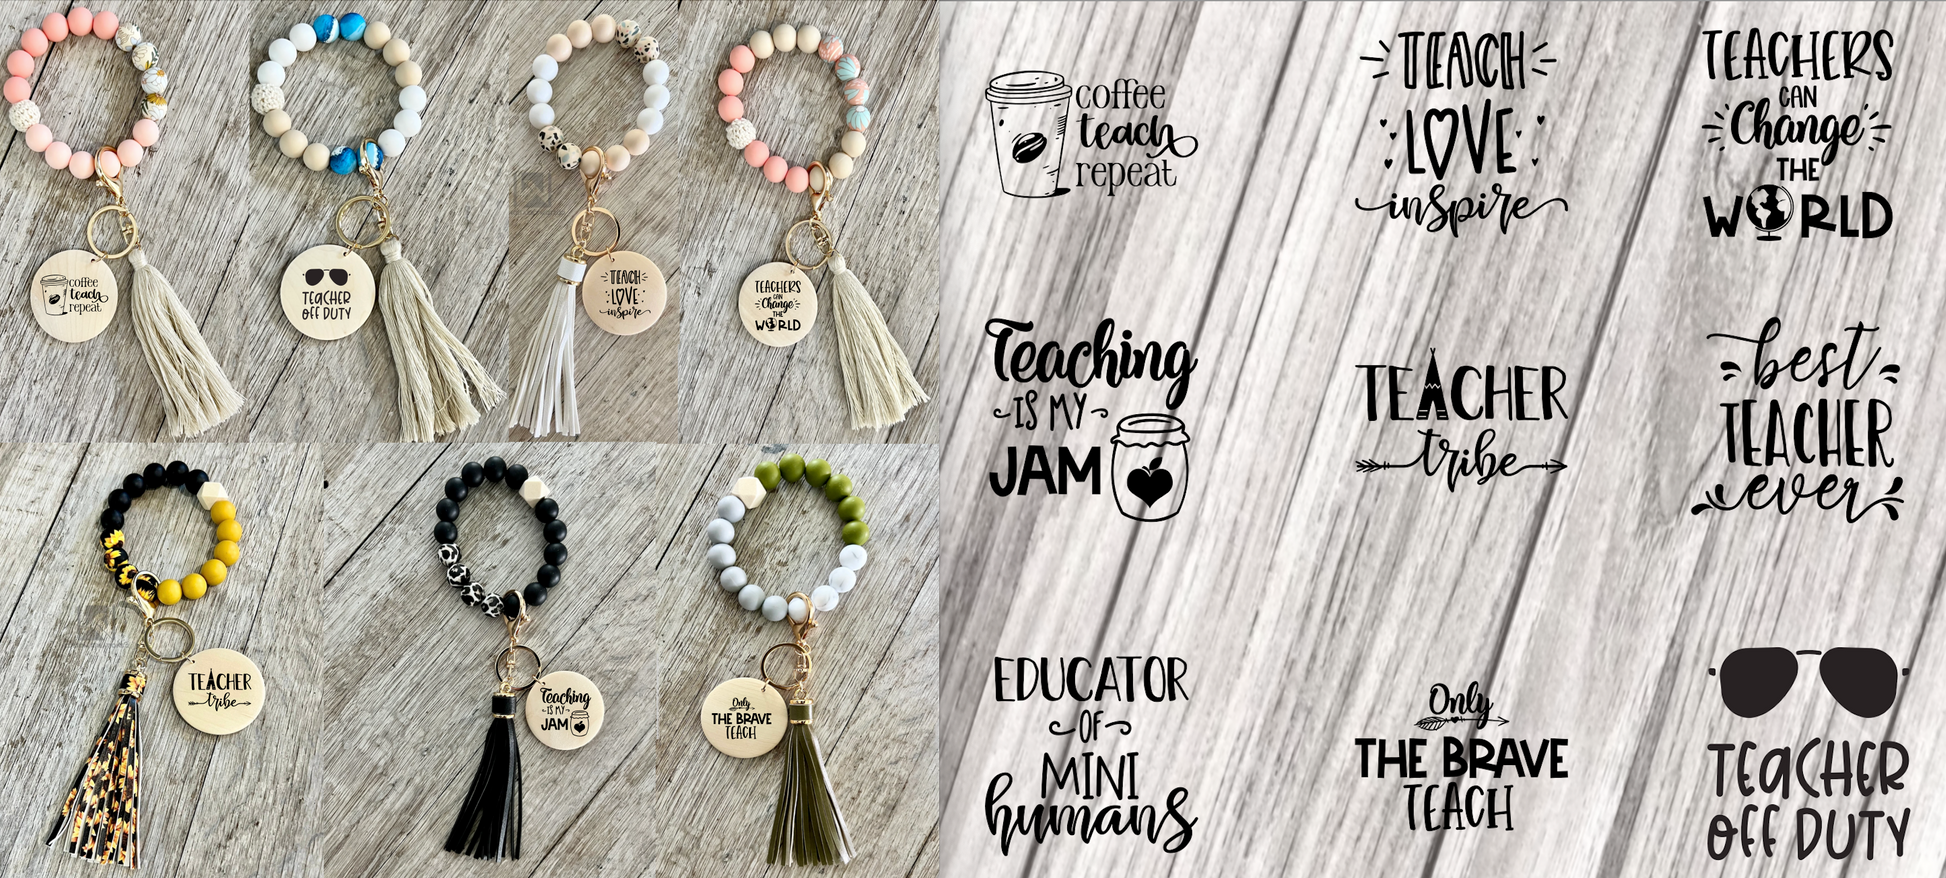 Tassel Keychains – The Knottery